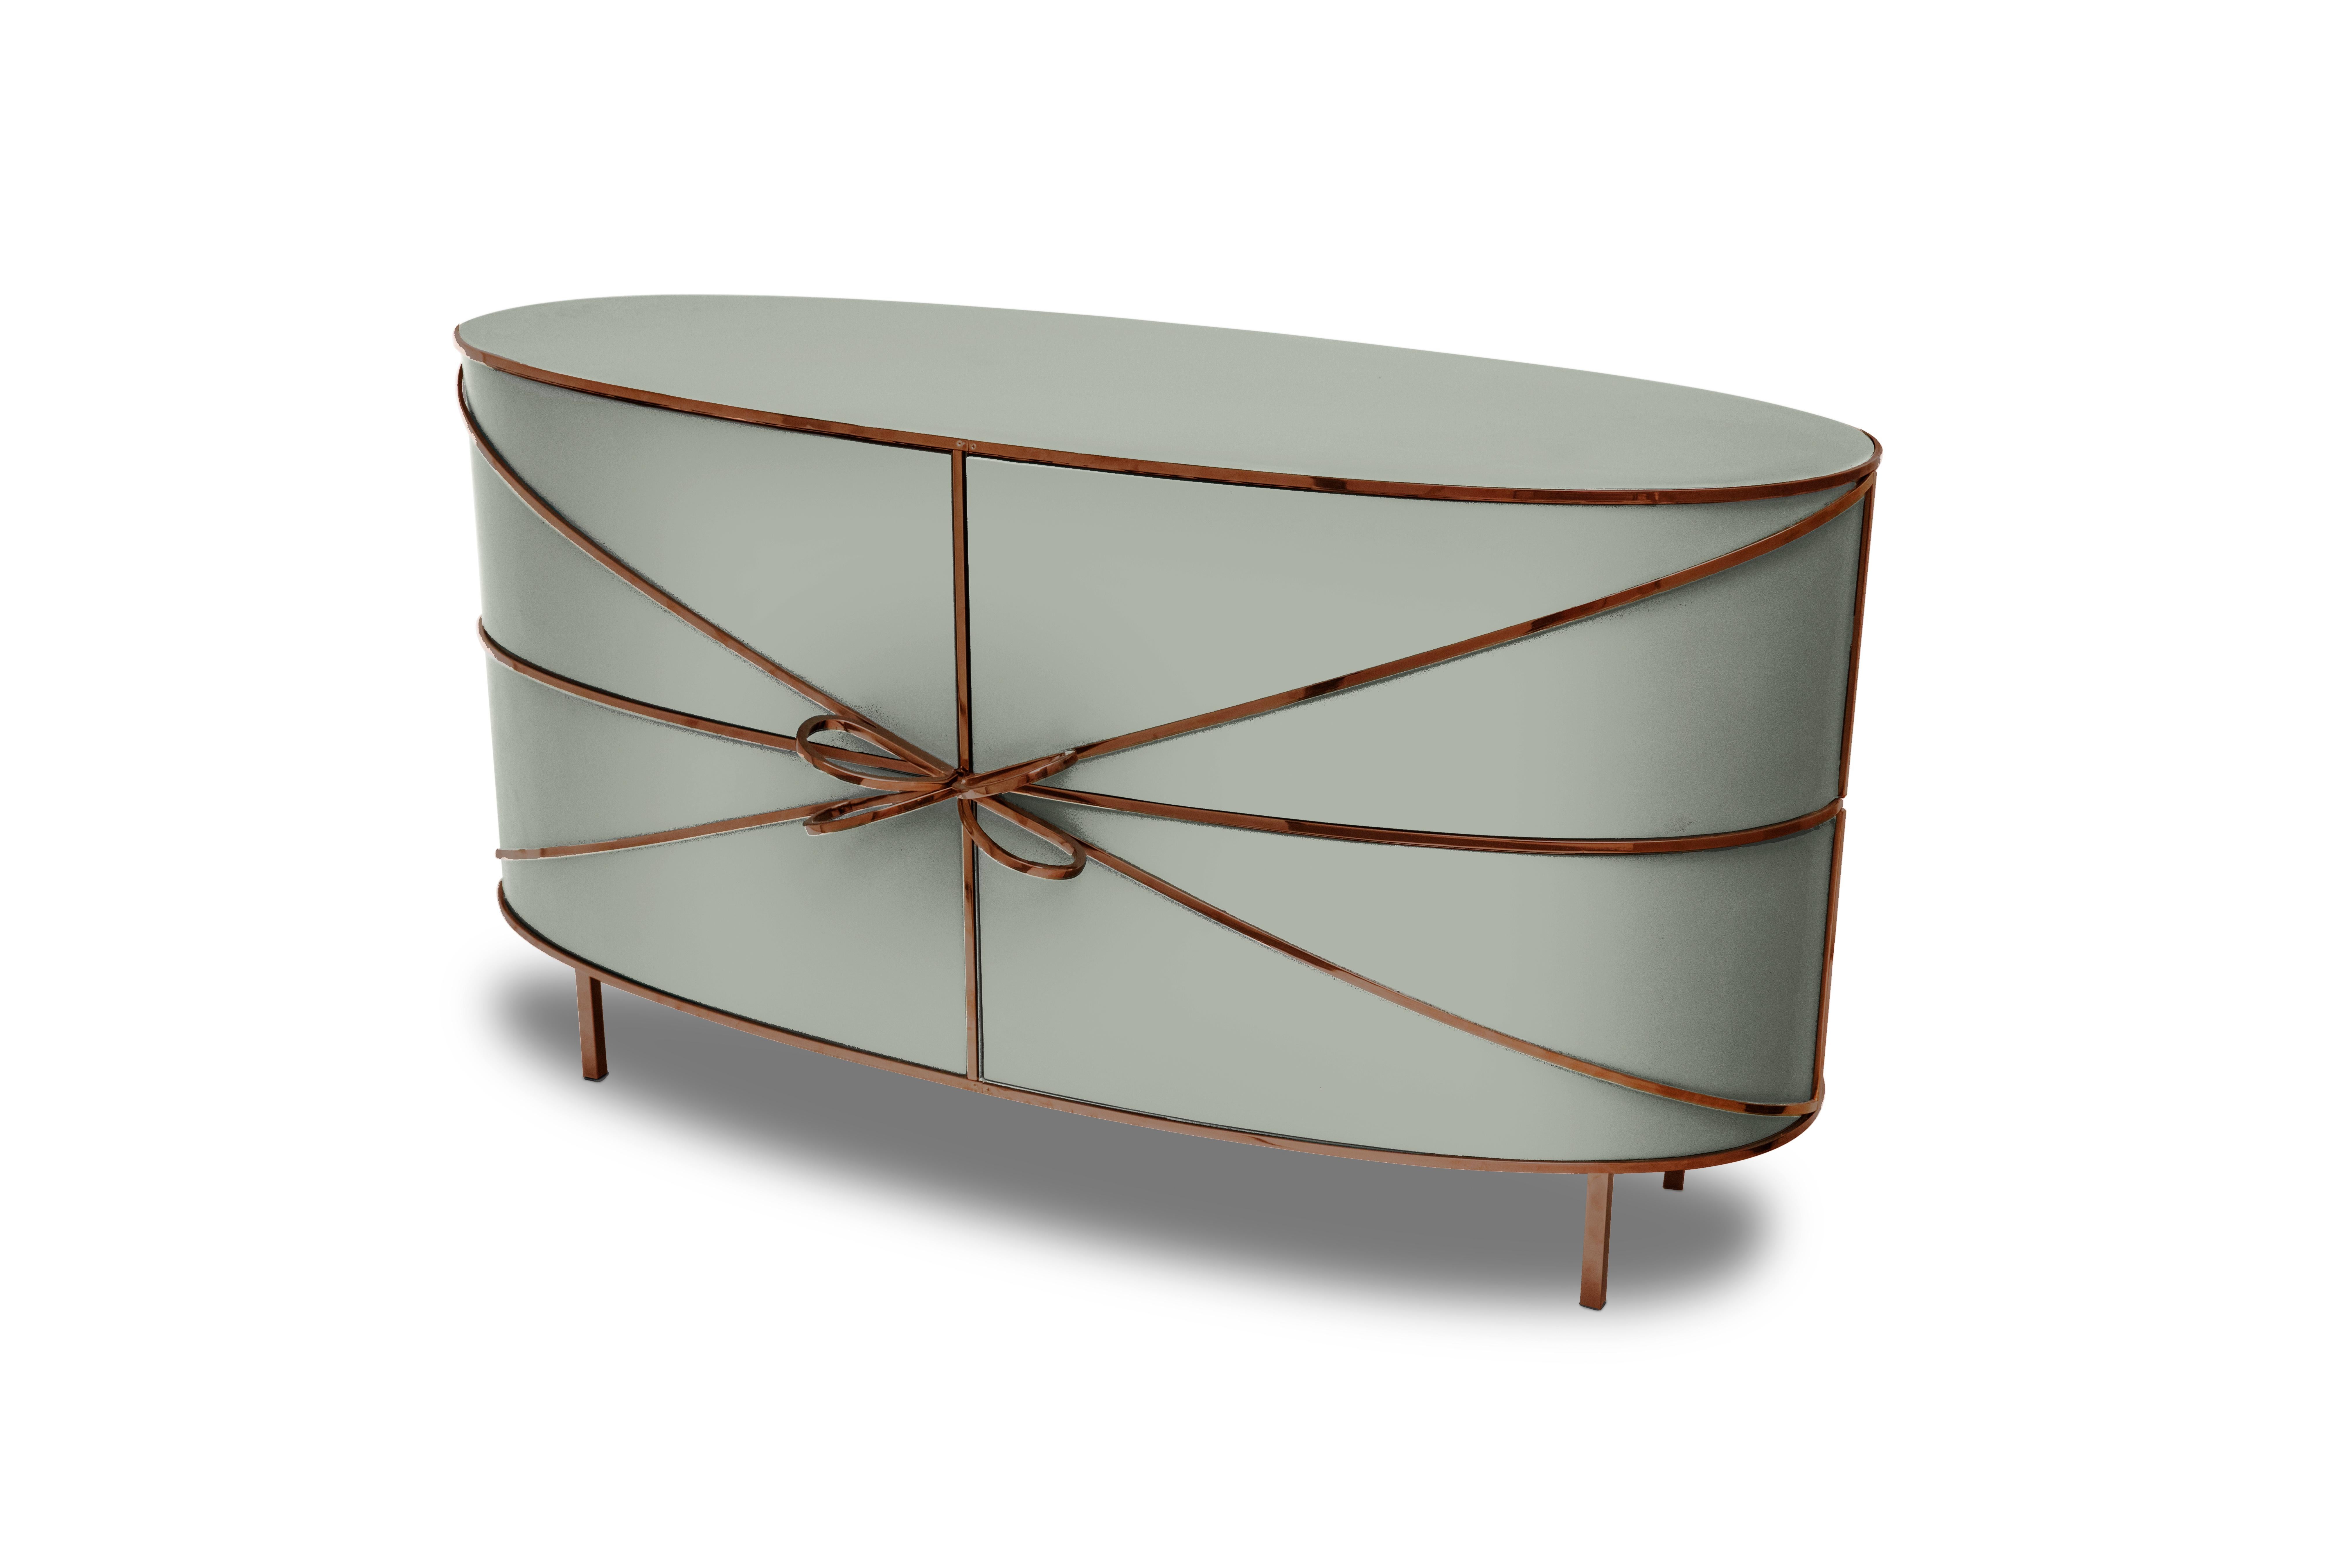 88 Secrets Gray Sideboard with Rose Gold Trims by Nika Zupanc is a chic gray cabinet in sensuous, feminine lines with luxurious rose metal trims. A statement piece in any interior space!

Nika Zupanc, a strikingly renowned Slovenian designer, never